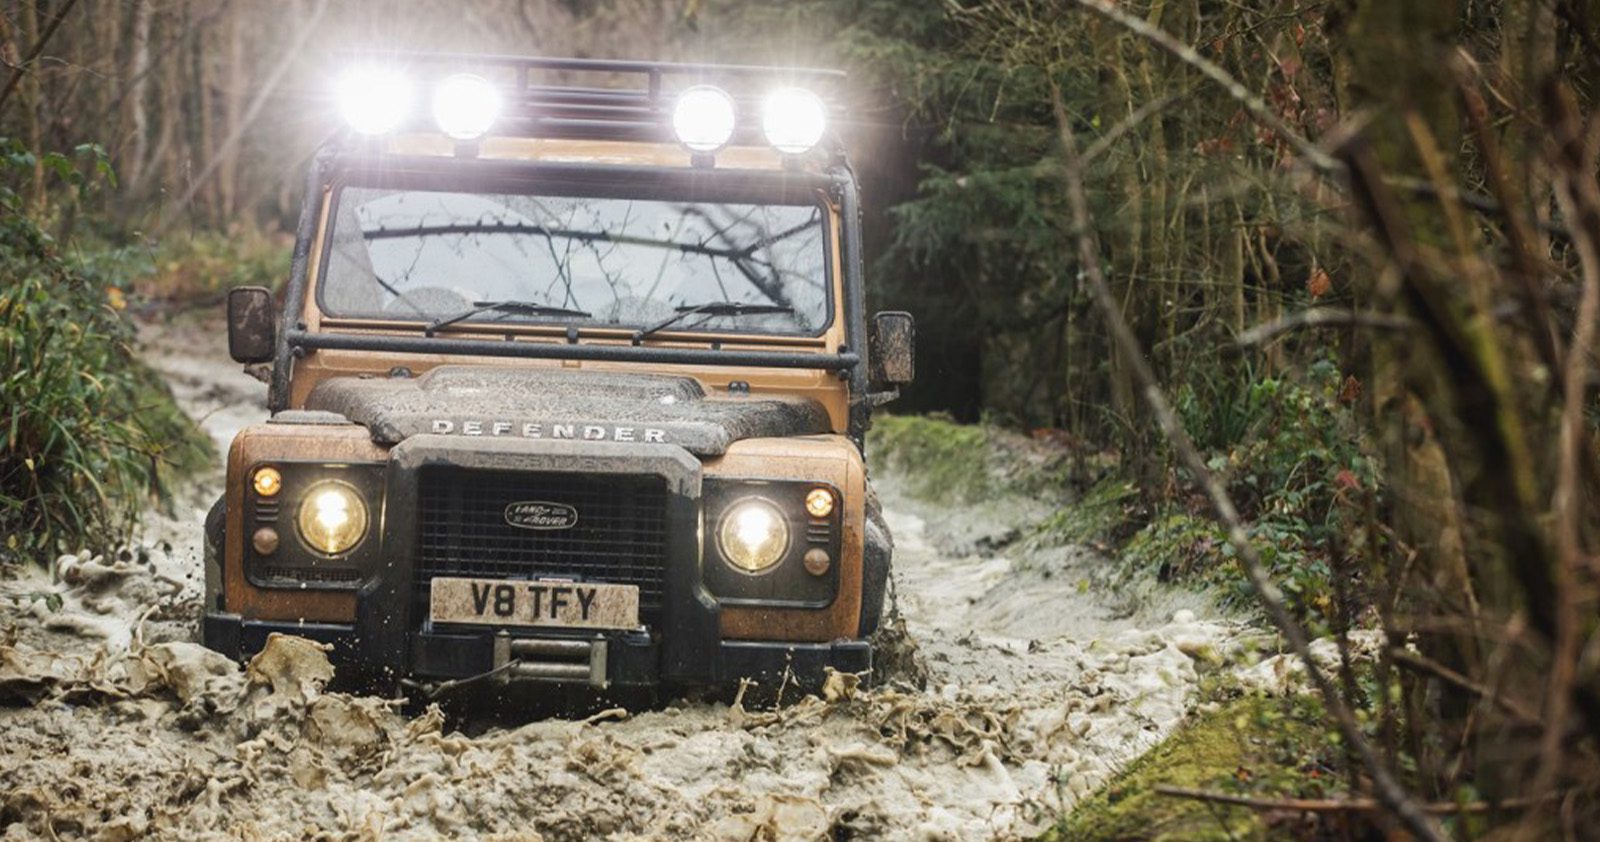 Yellow Defender Works V8 Trophy edition in mud